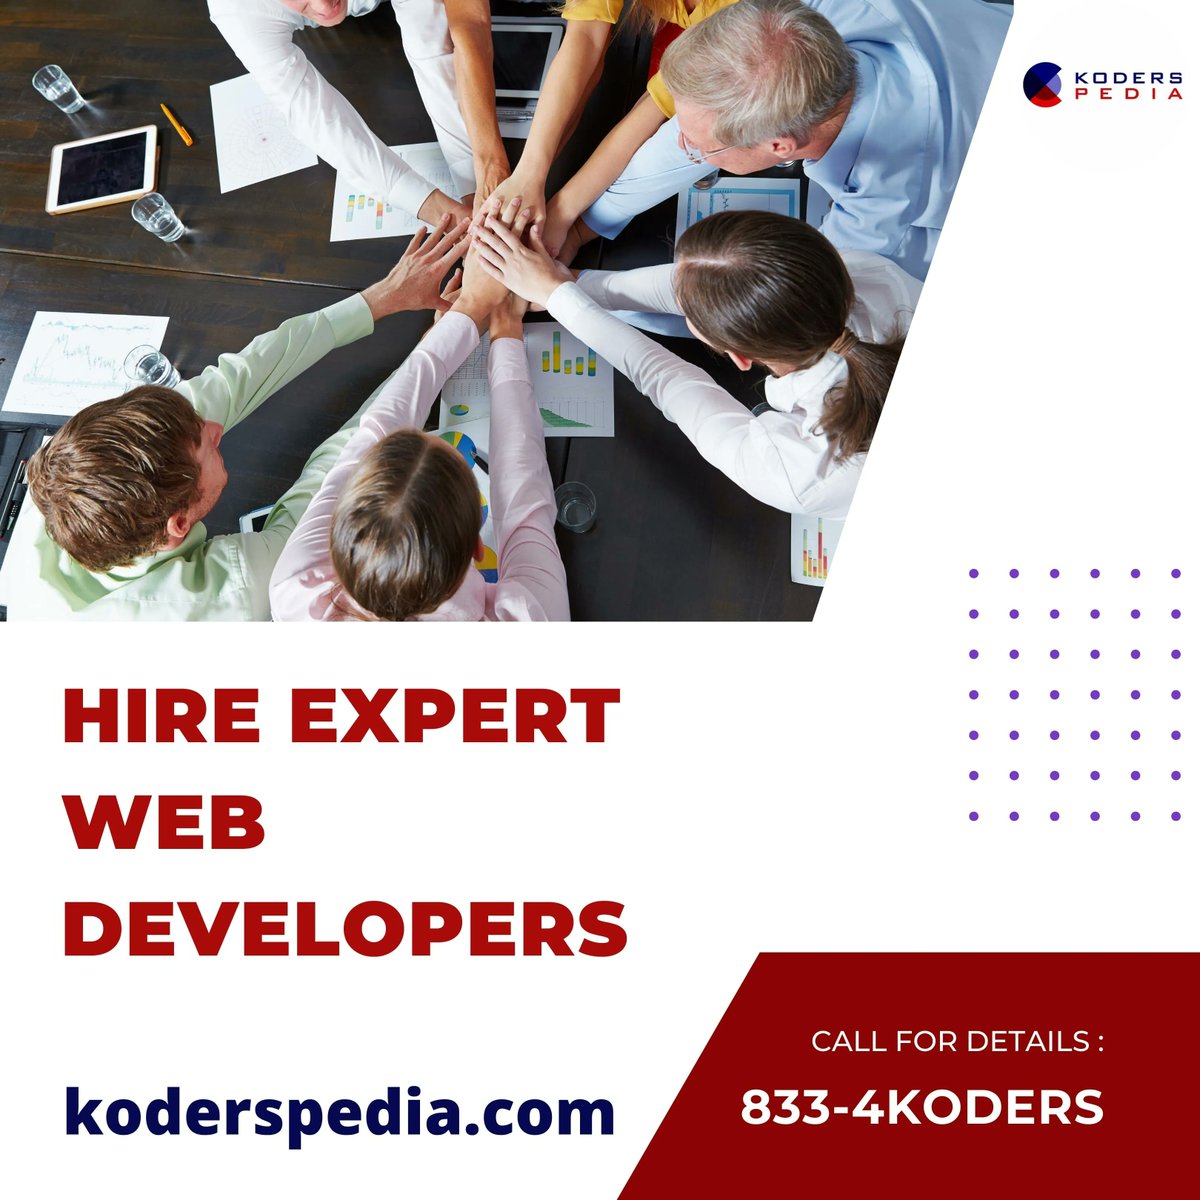 Regardless of how complex or even small your needs are, our dedicated in-house team of web developers and project managers will ensure that the job gets done with the highest level of professionalism and most cost affordably. Contact us for more details at 833-4KODERS #webdesign